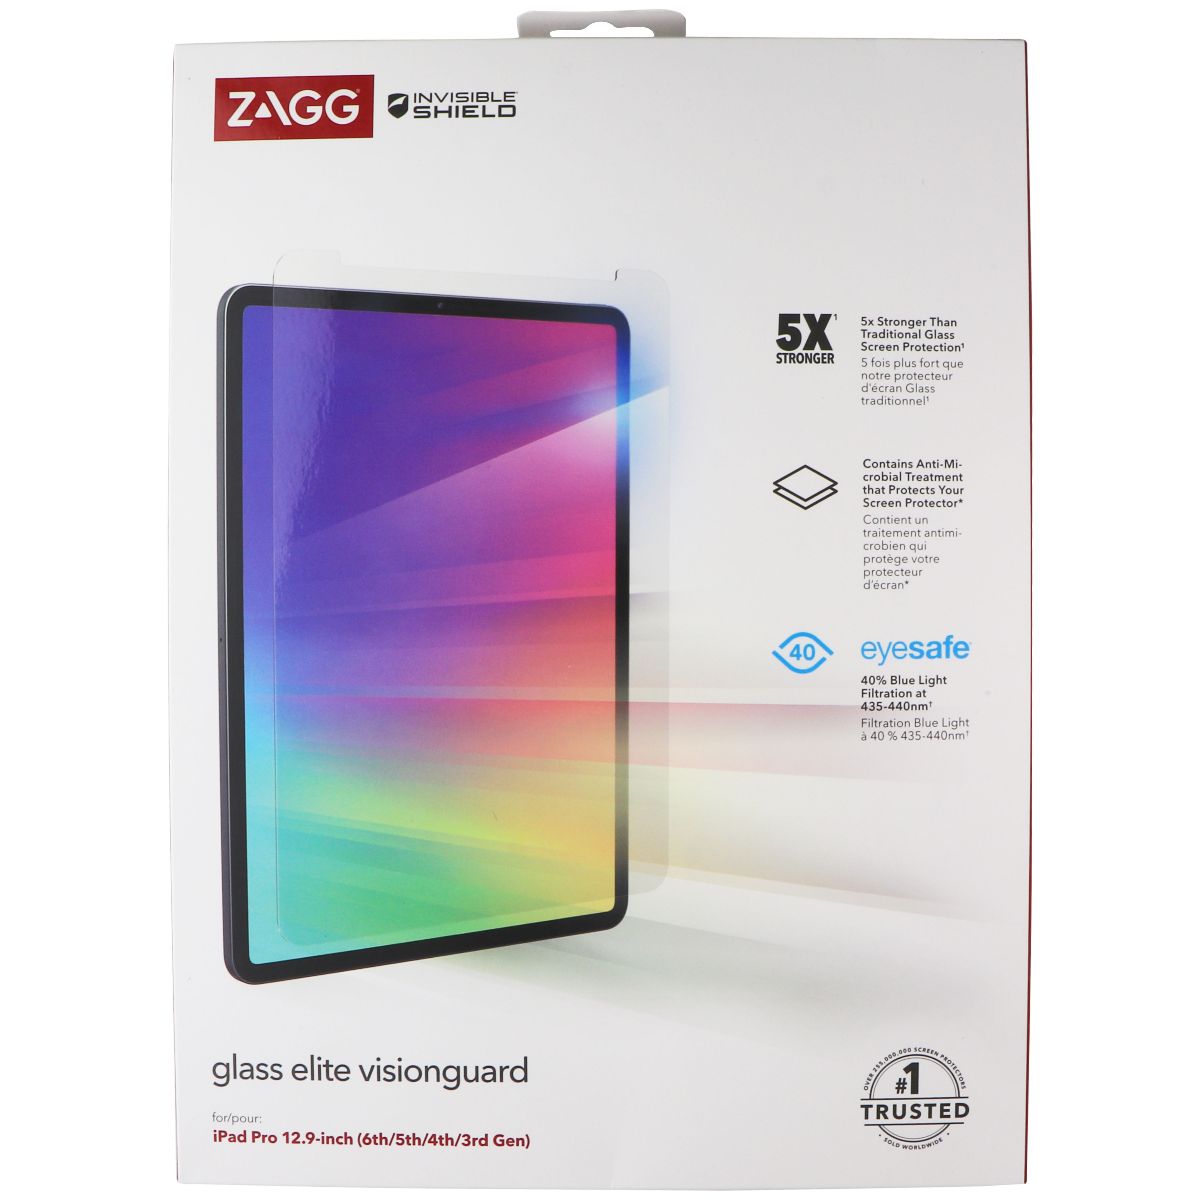 ZAGG (Glass Elite Visionguard) Protector for iPad Pro 12.9 6th/5th/4th/3rd Gen